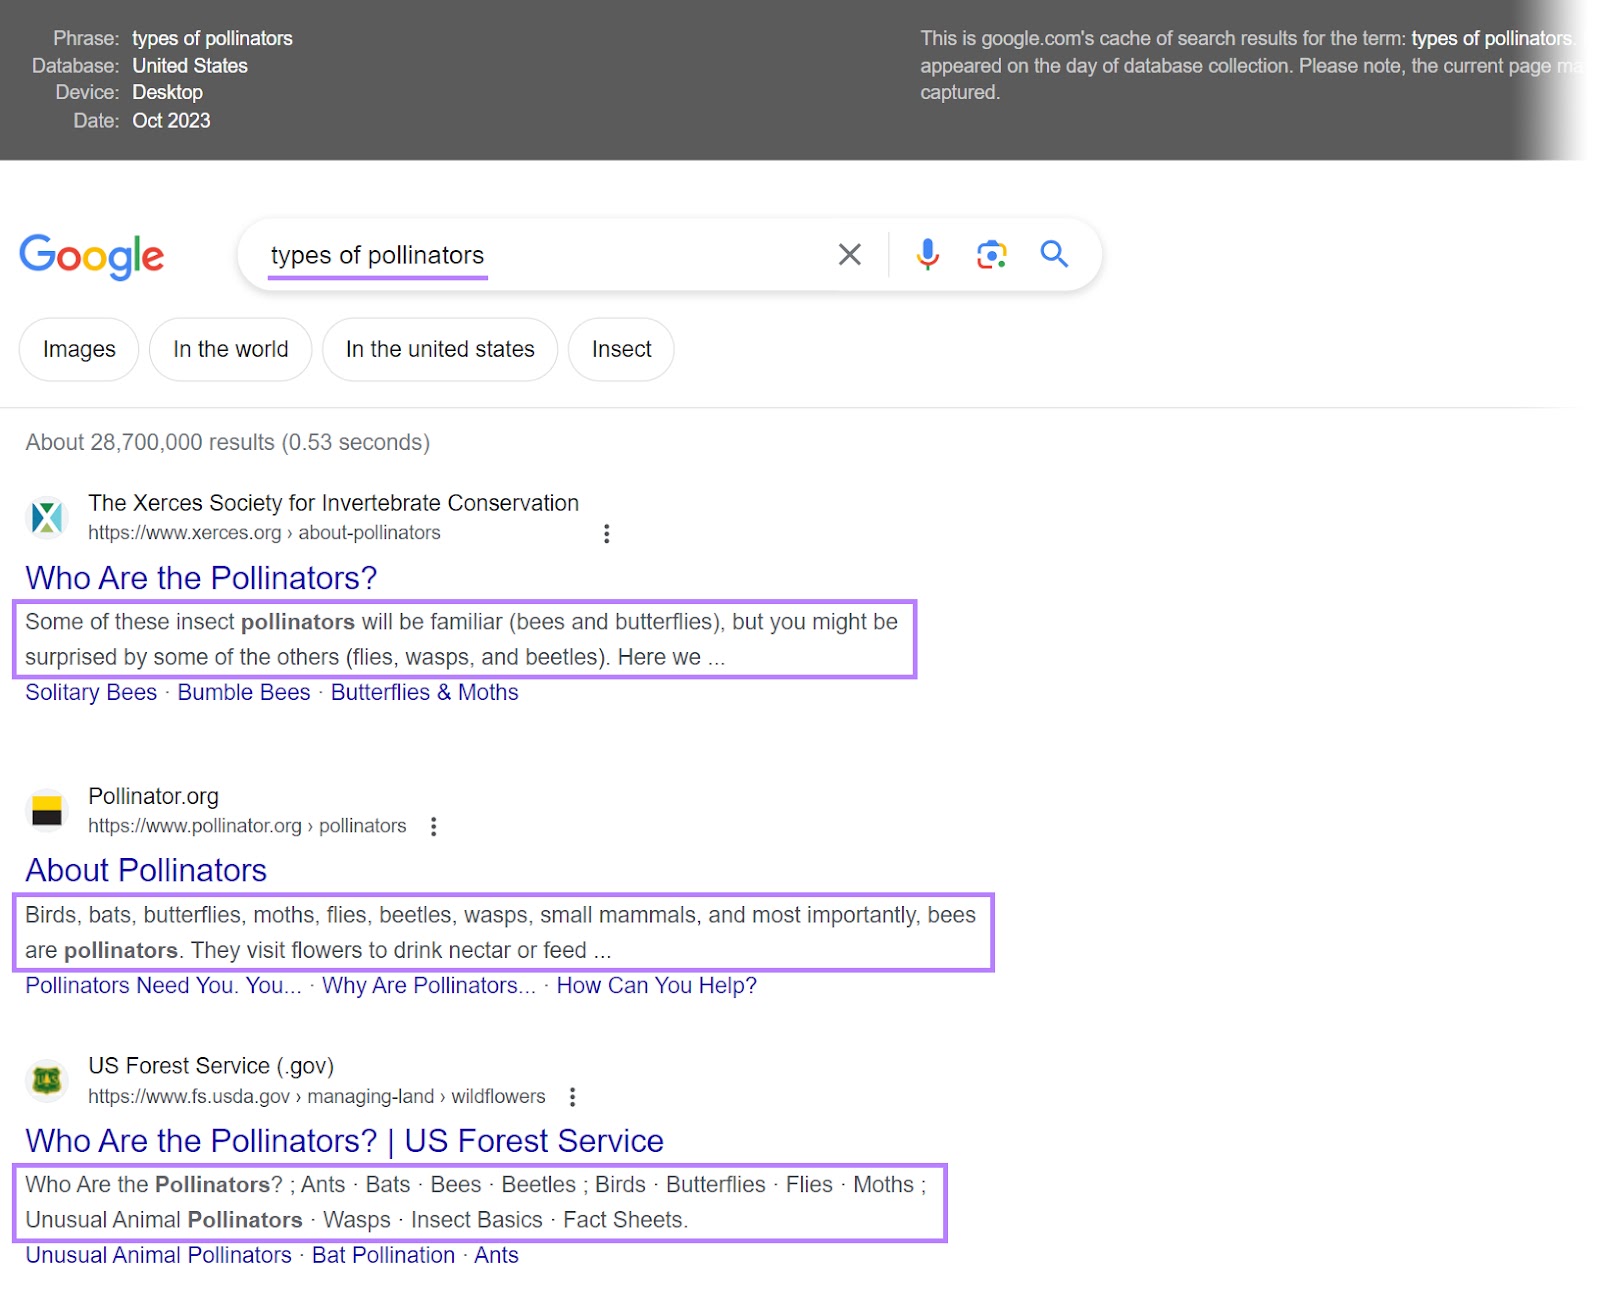 A preview of Google's SERP for "types of pollinators" query